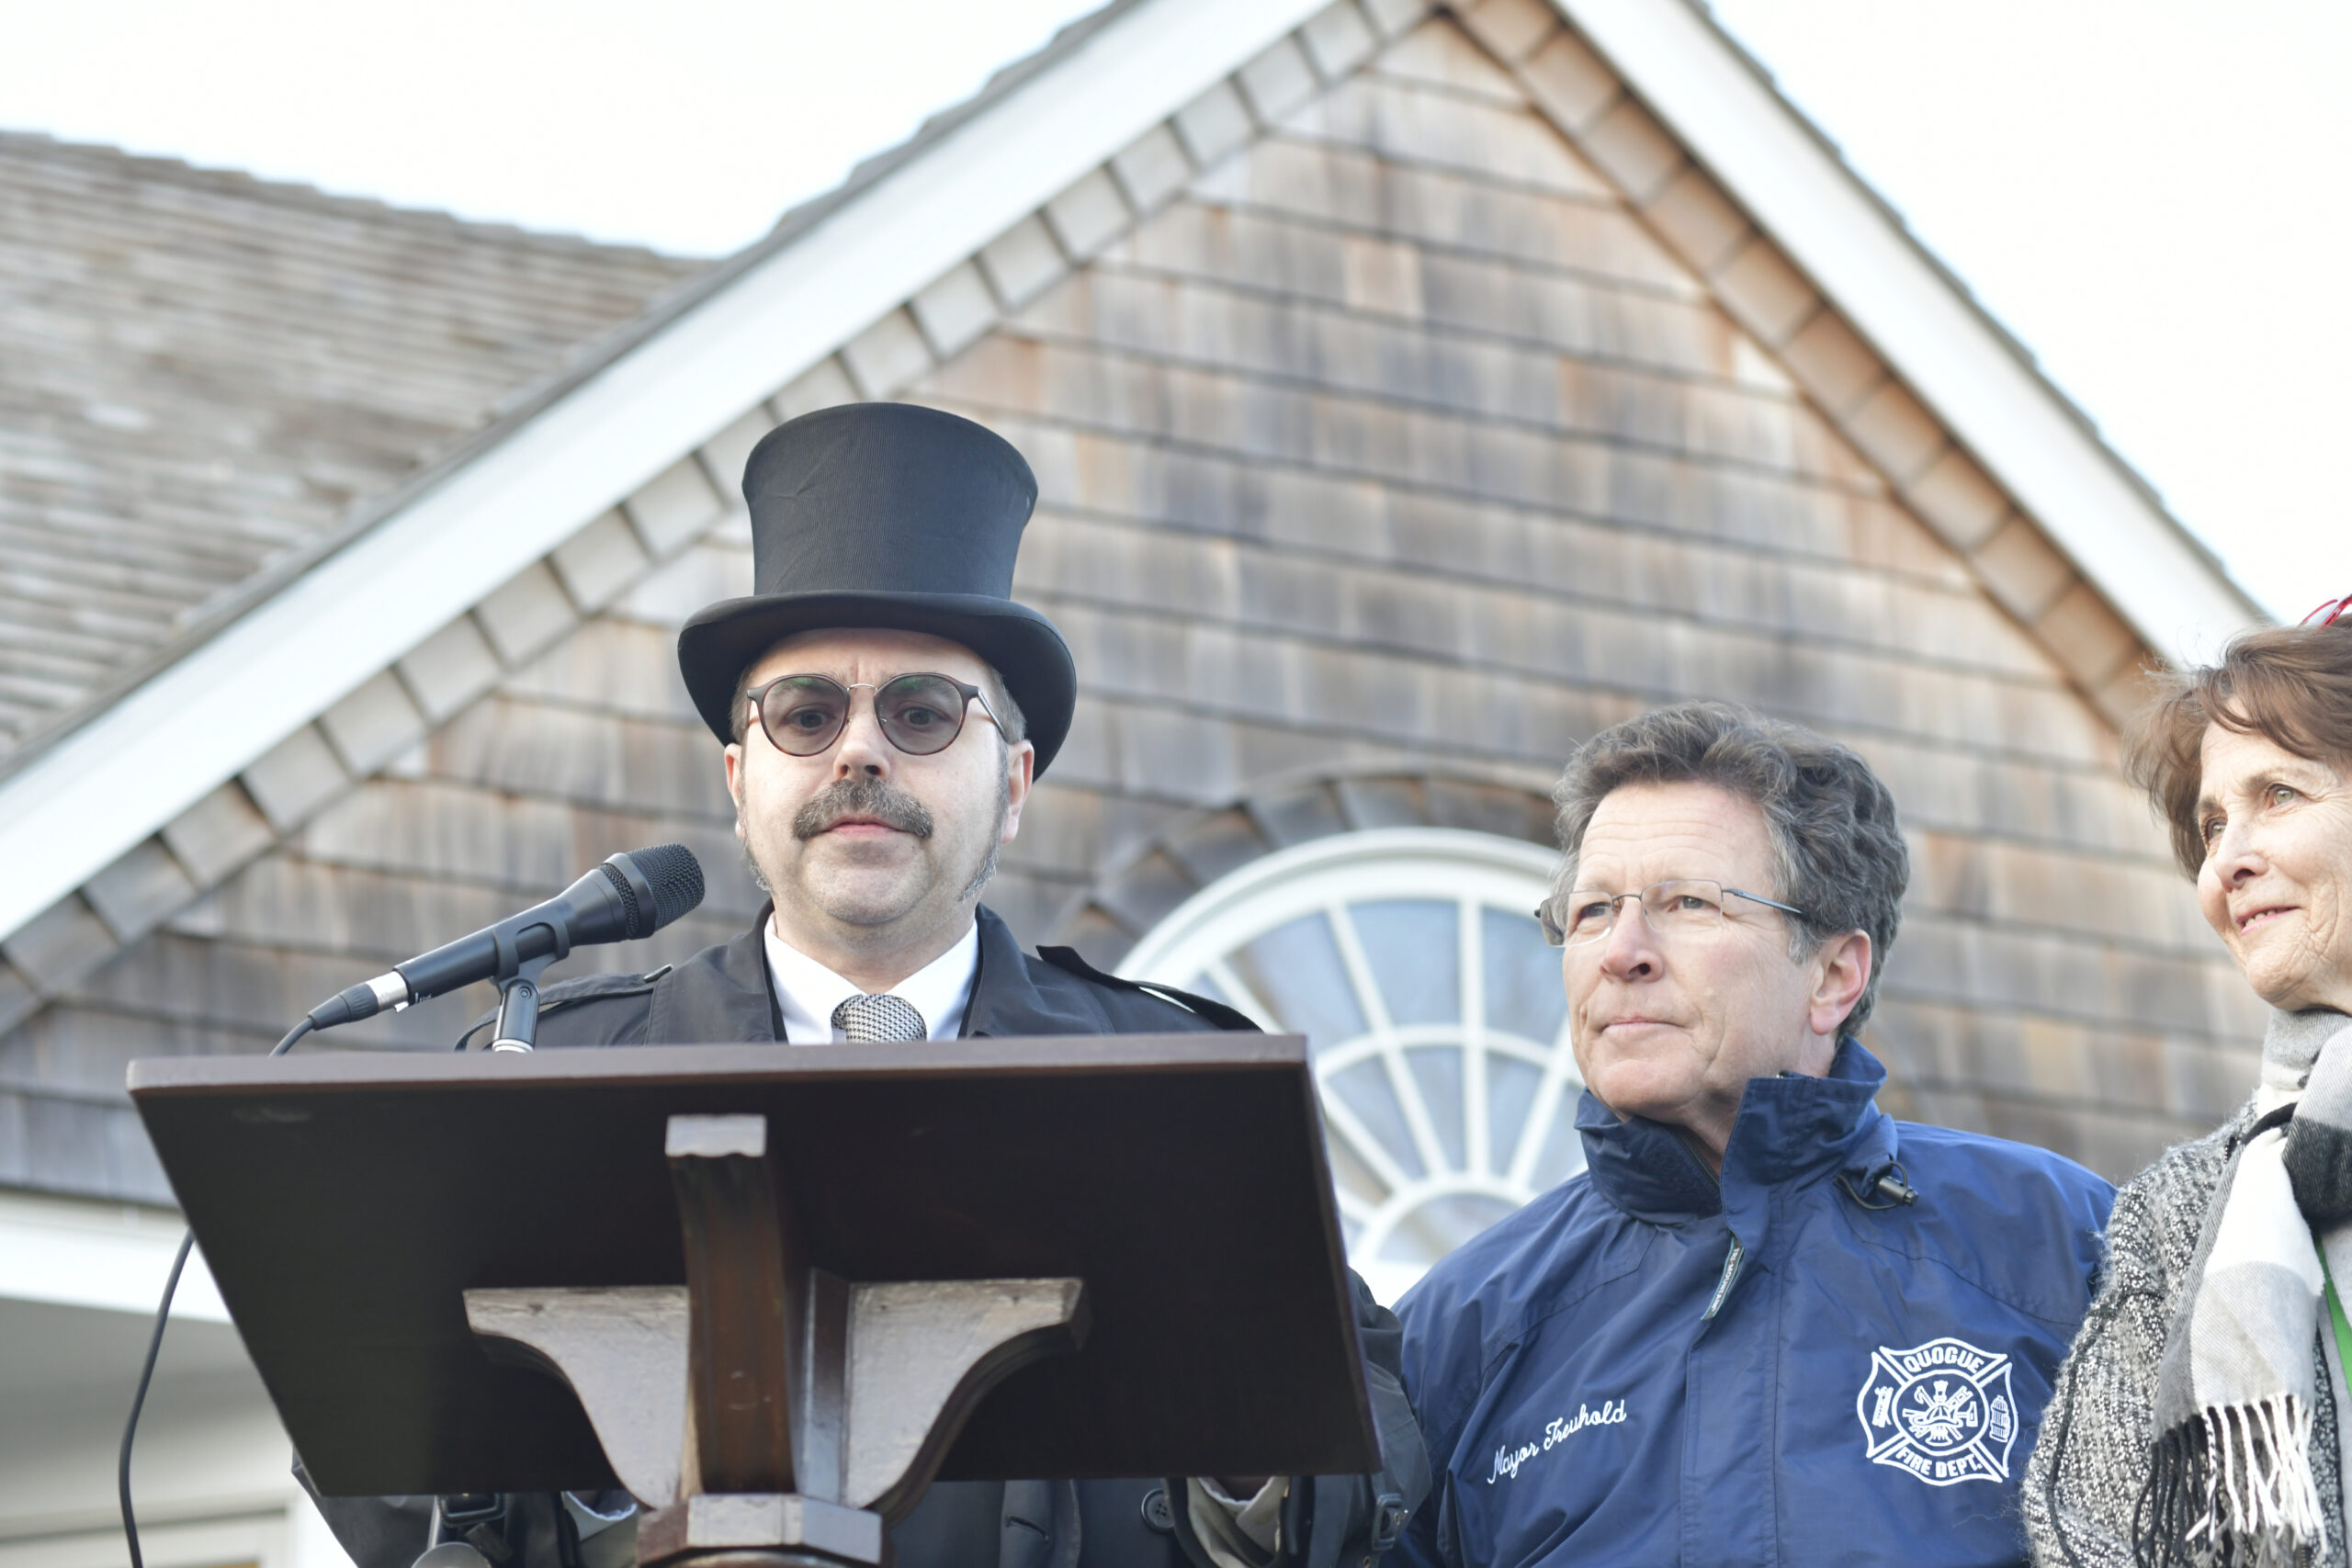 Master of Ceremonies Tim Walkman, with Quogue Village Mayor Robert Treuhold and Barbara Sartorious at the Groundhog Day festivities at the Quogue Library on Thursday afternoon.    DANA SHAW